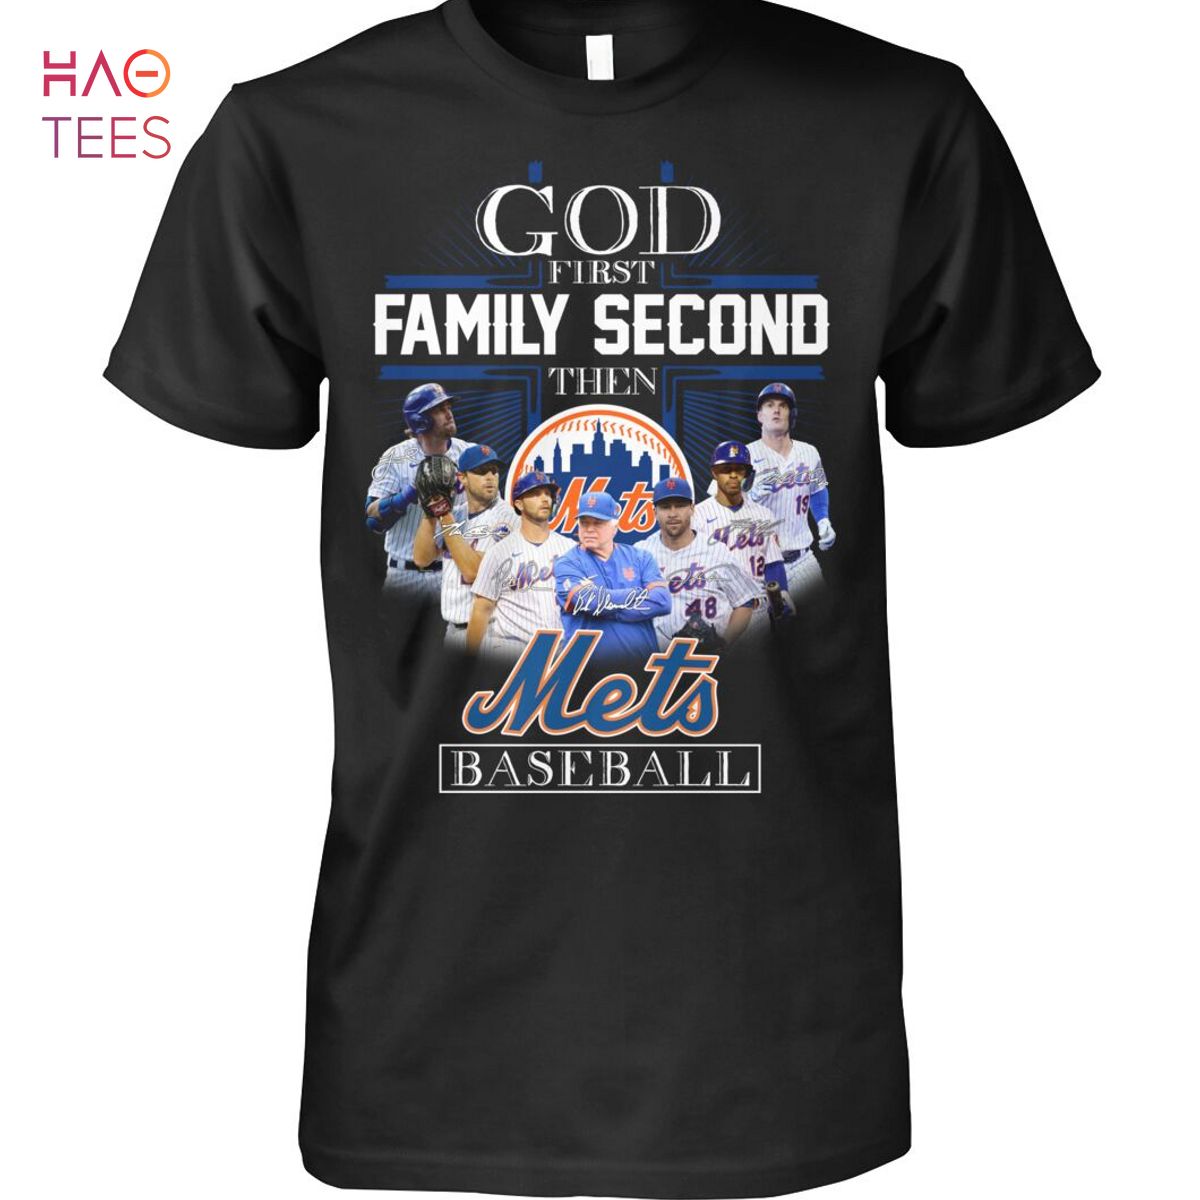 THE BEST Mets Baseball Shirt Limited Edition